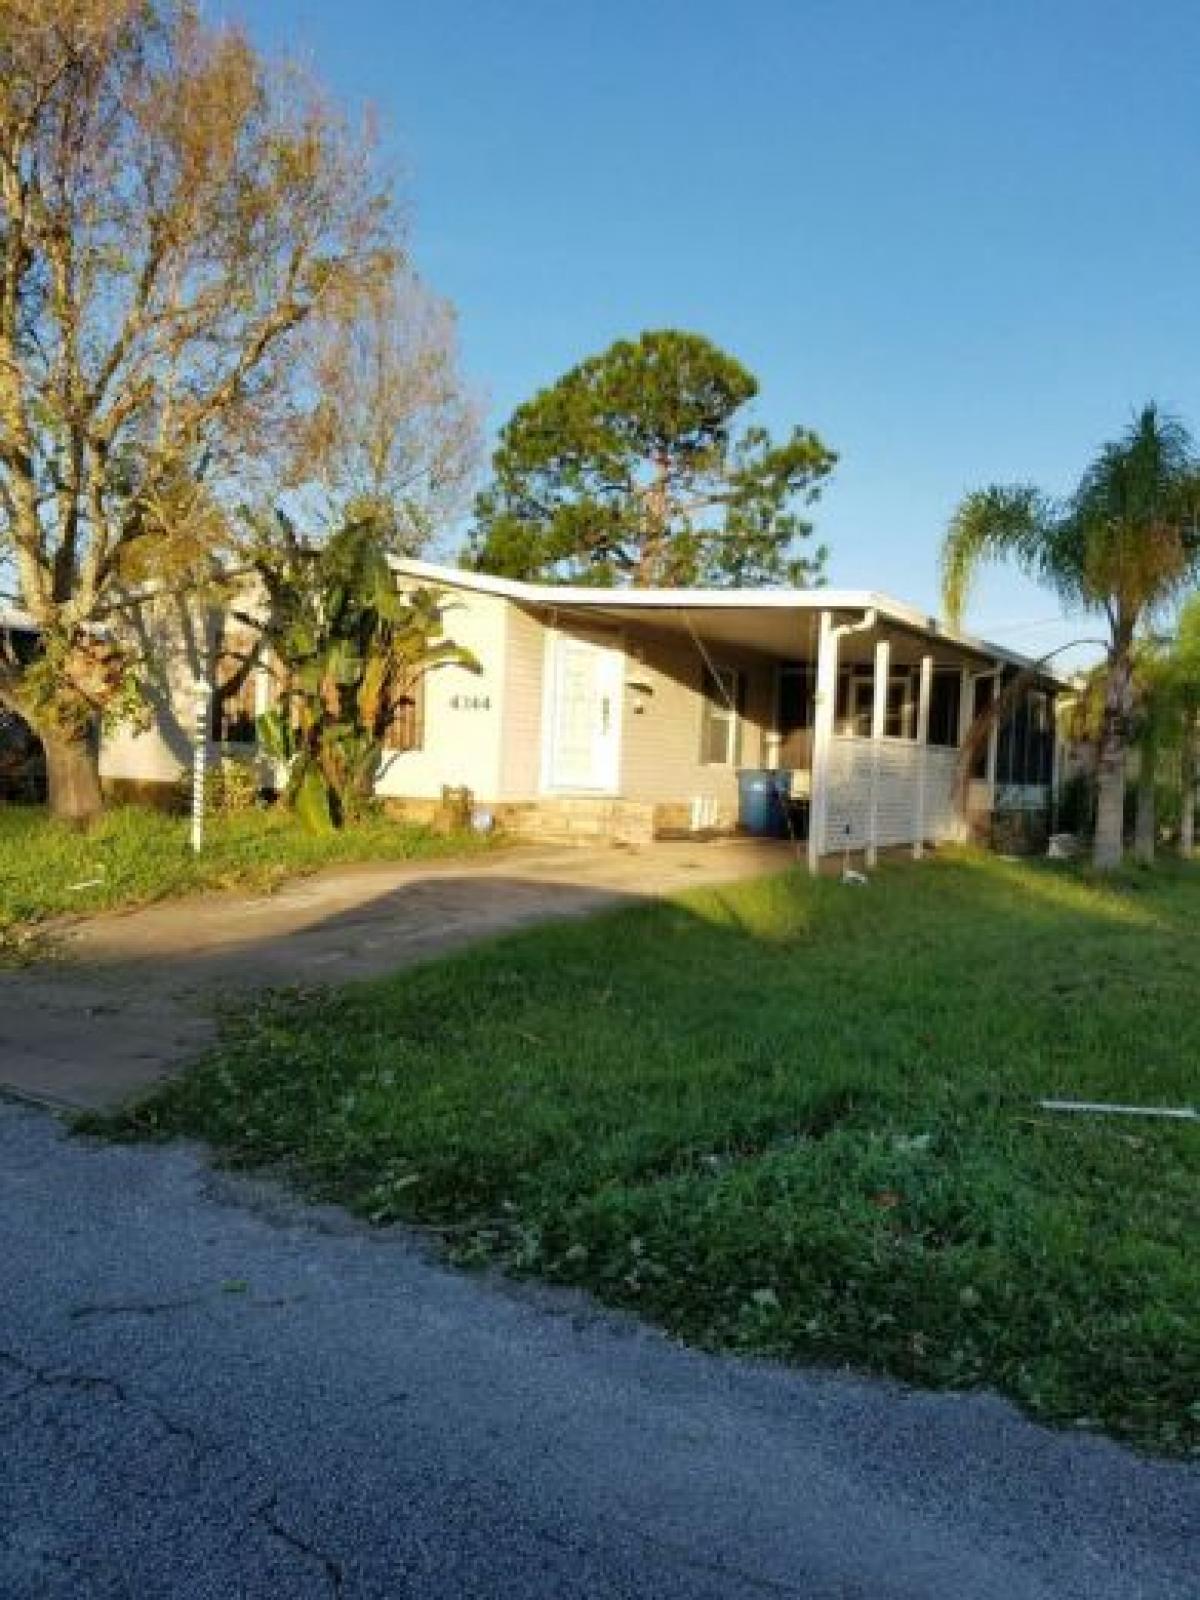 Picture of Mobile Home For Sale in Edgewater, Florida, United States